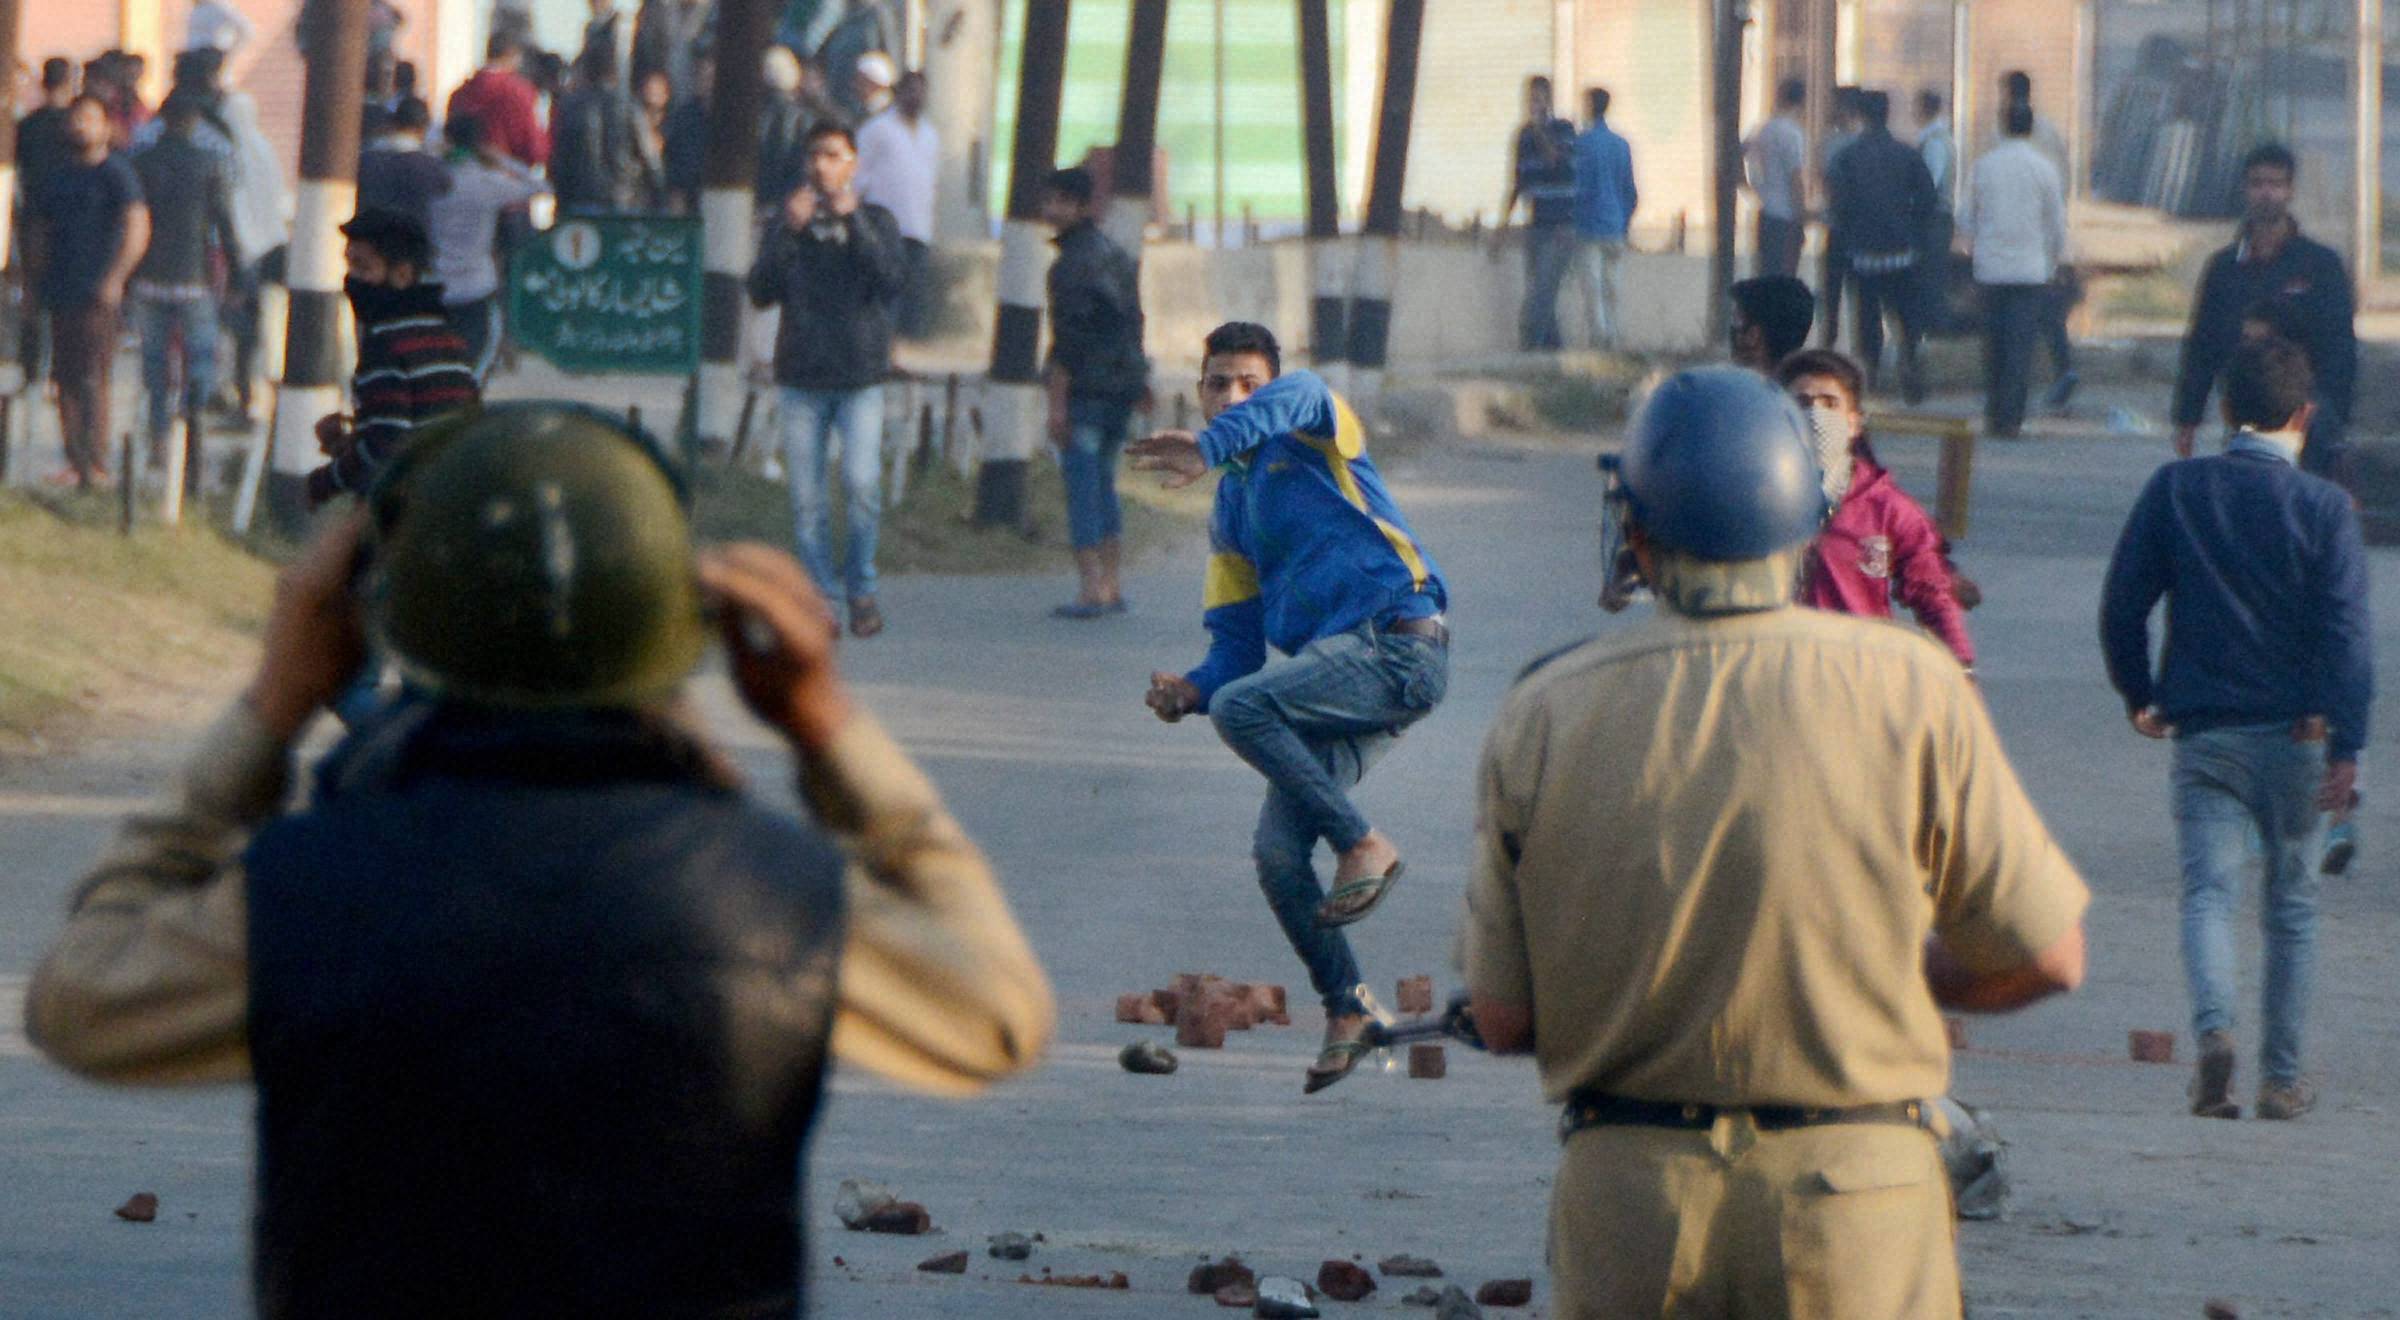 Minor boy succumbs to pellet injuries, sparks fresh clashes in Jammu and Kashmir